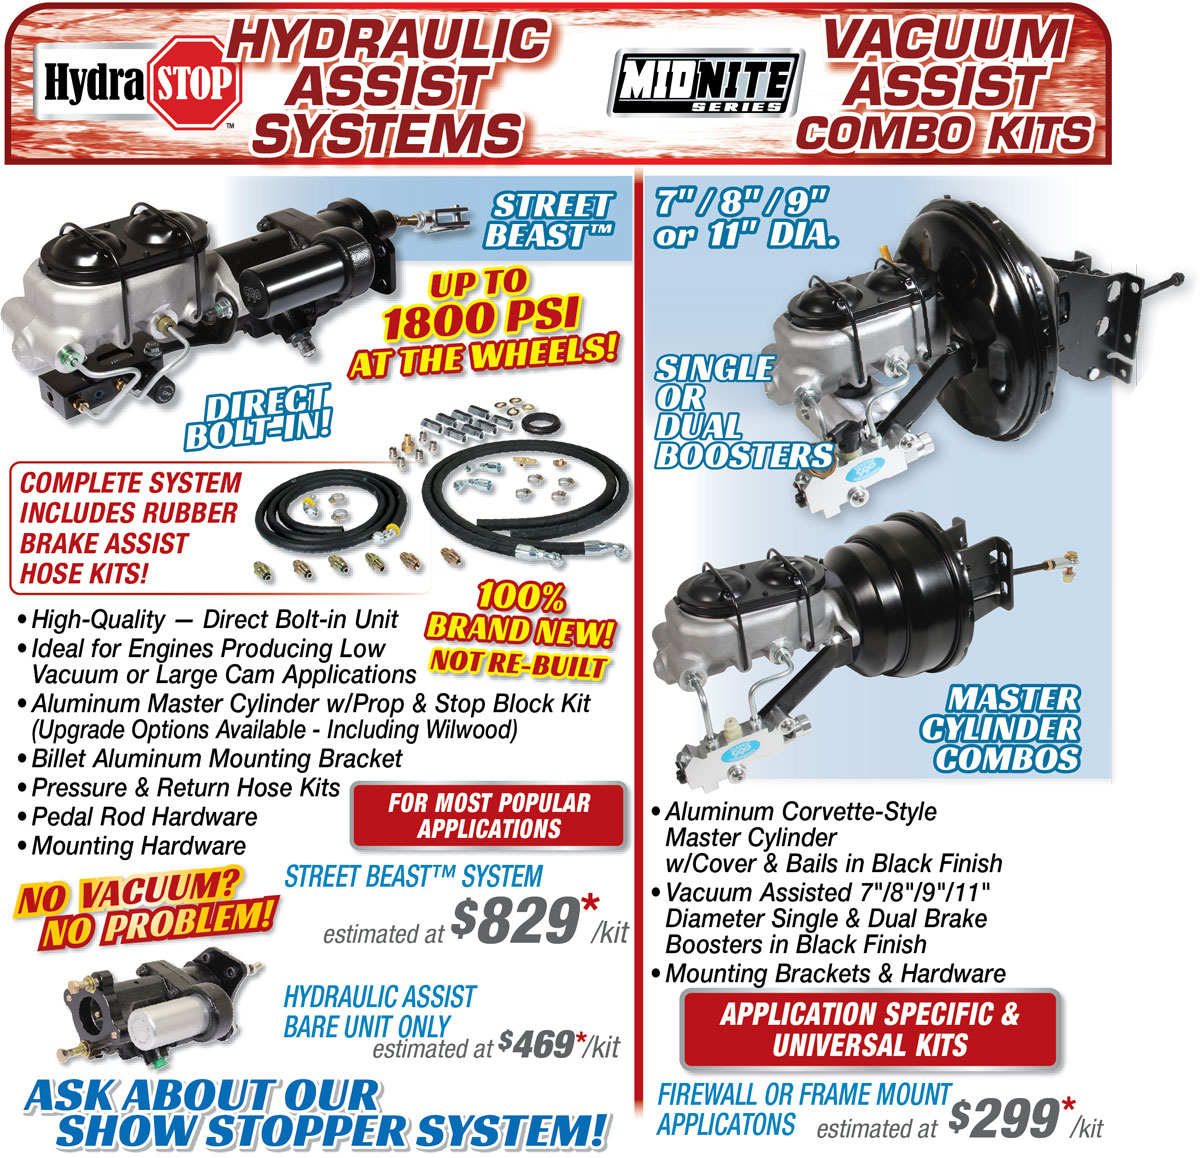 hydraulic assist systems and vacuum assist combo kits products